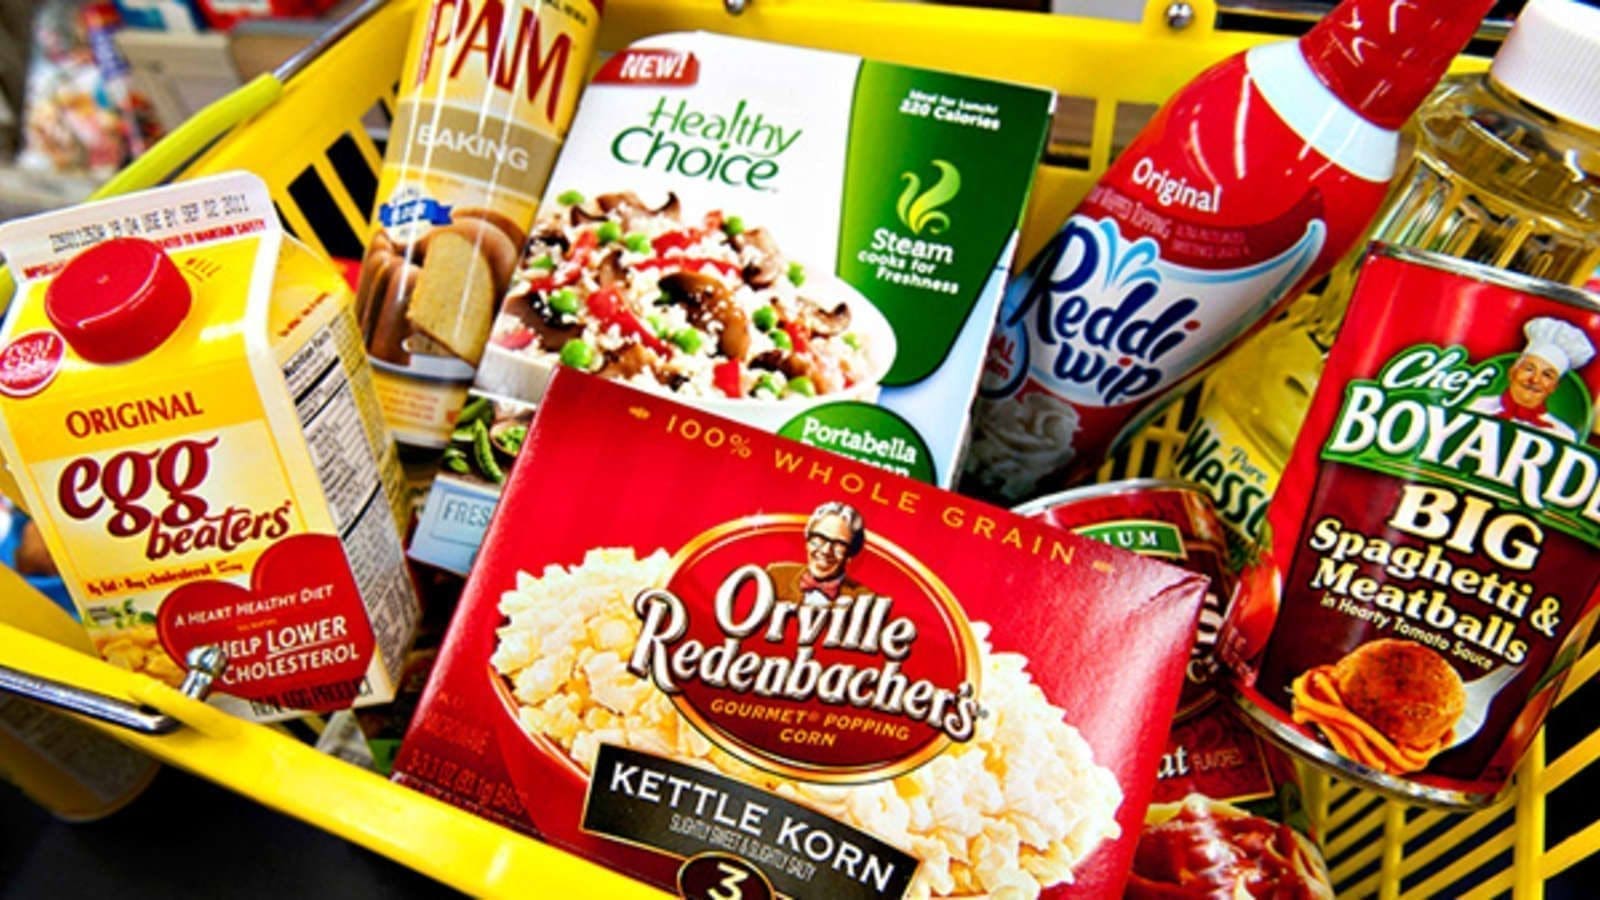 Conagra Brands delivered 7% profit jump in Q1 despite quality issues